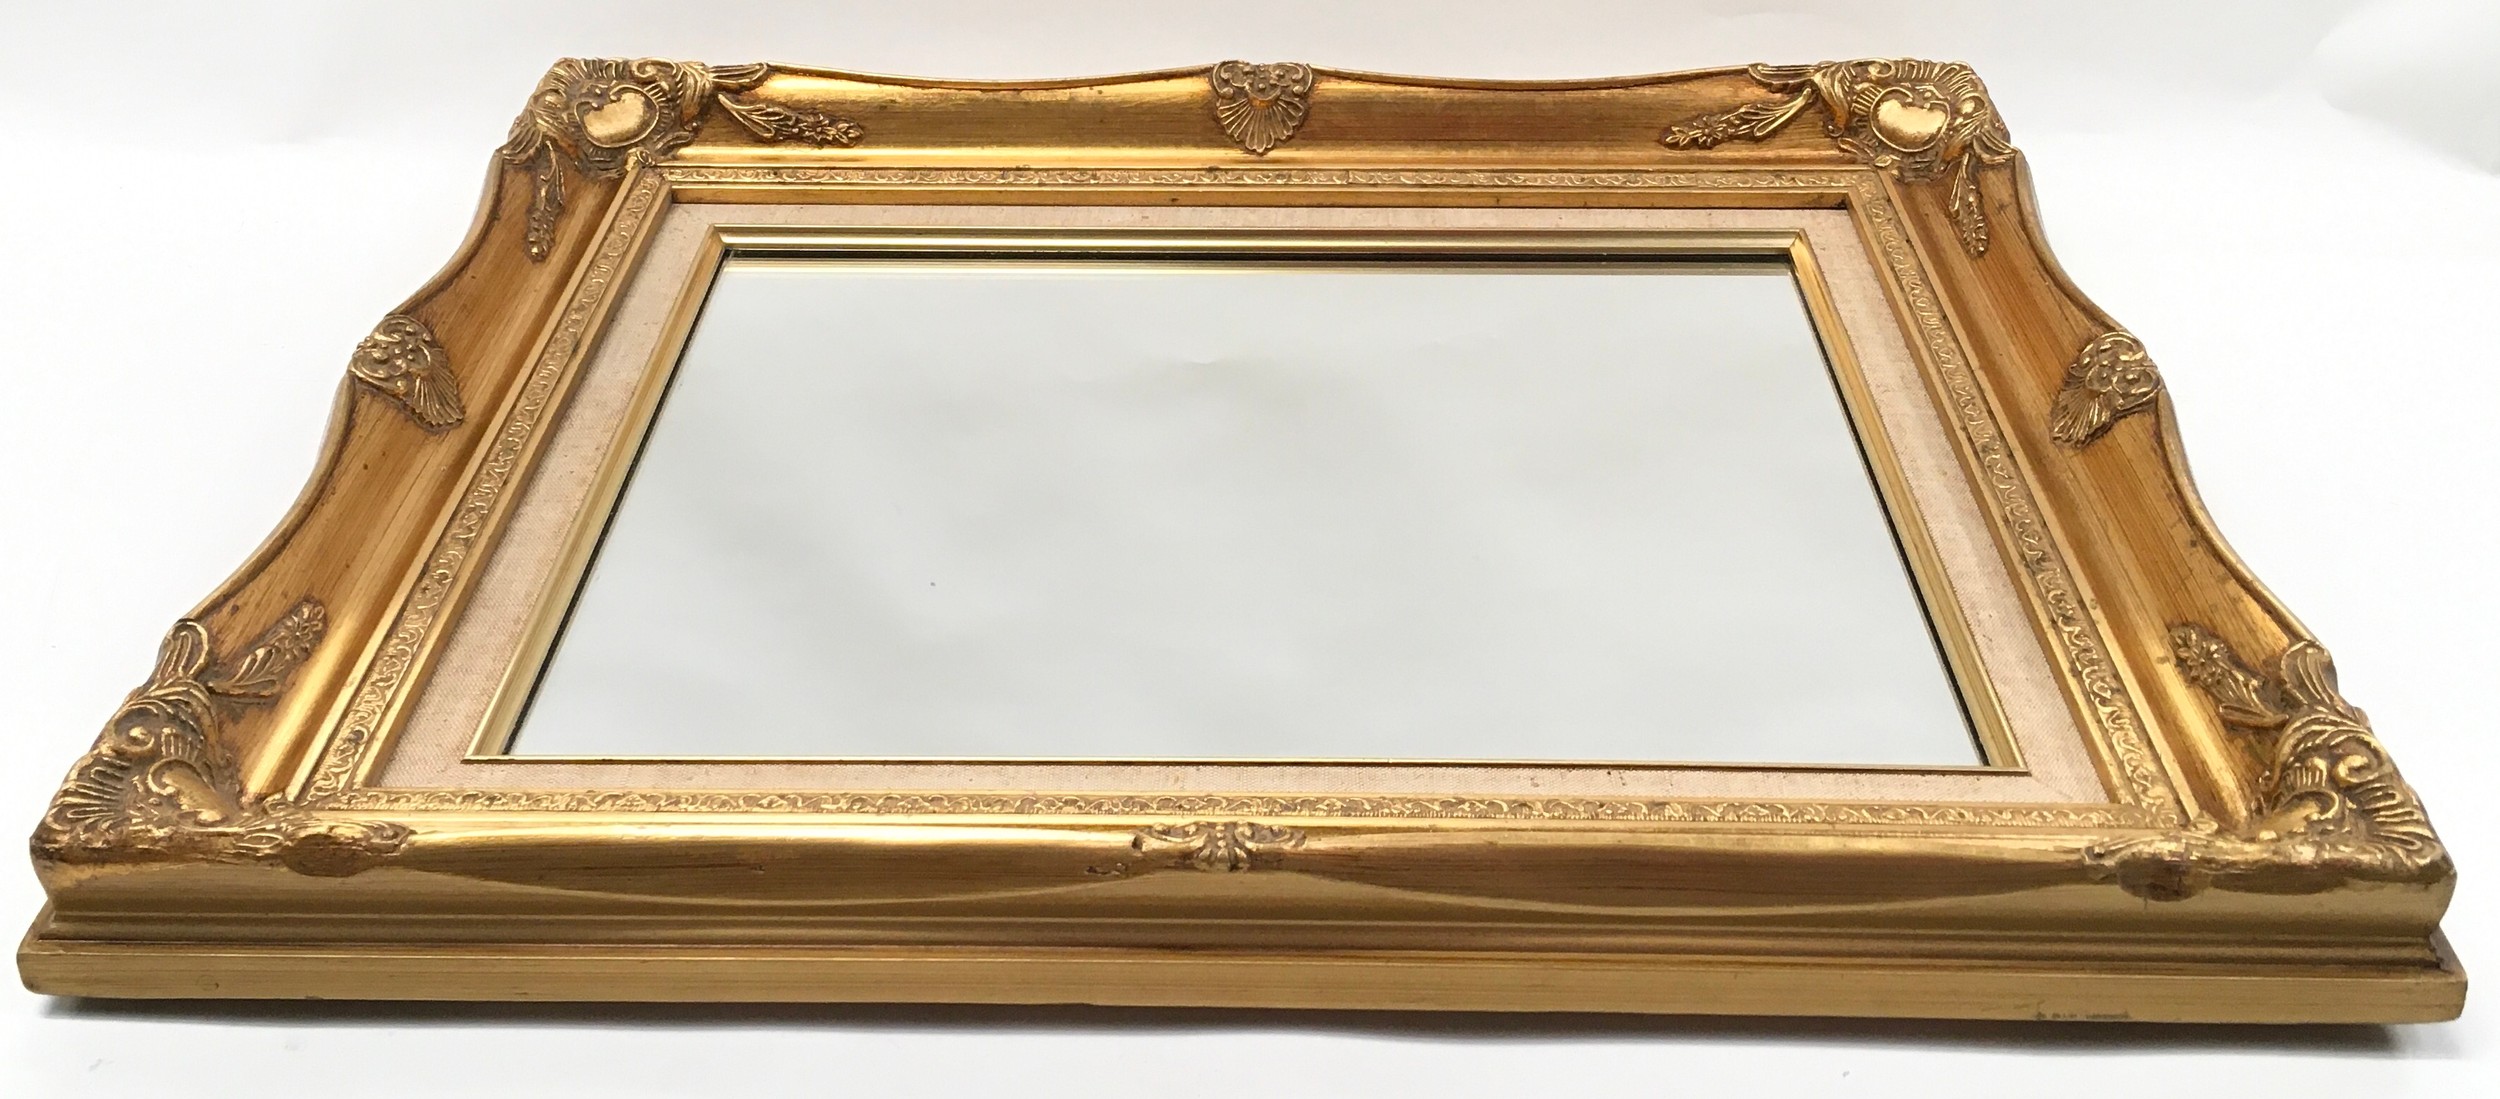 Fancy gilt frame mirror with shell decoration and fabric inner 55x45cm